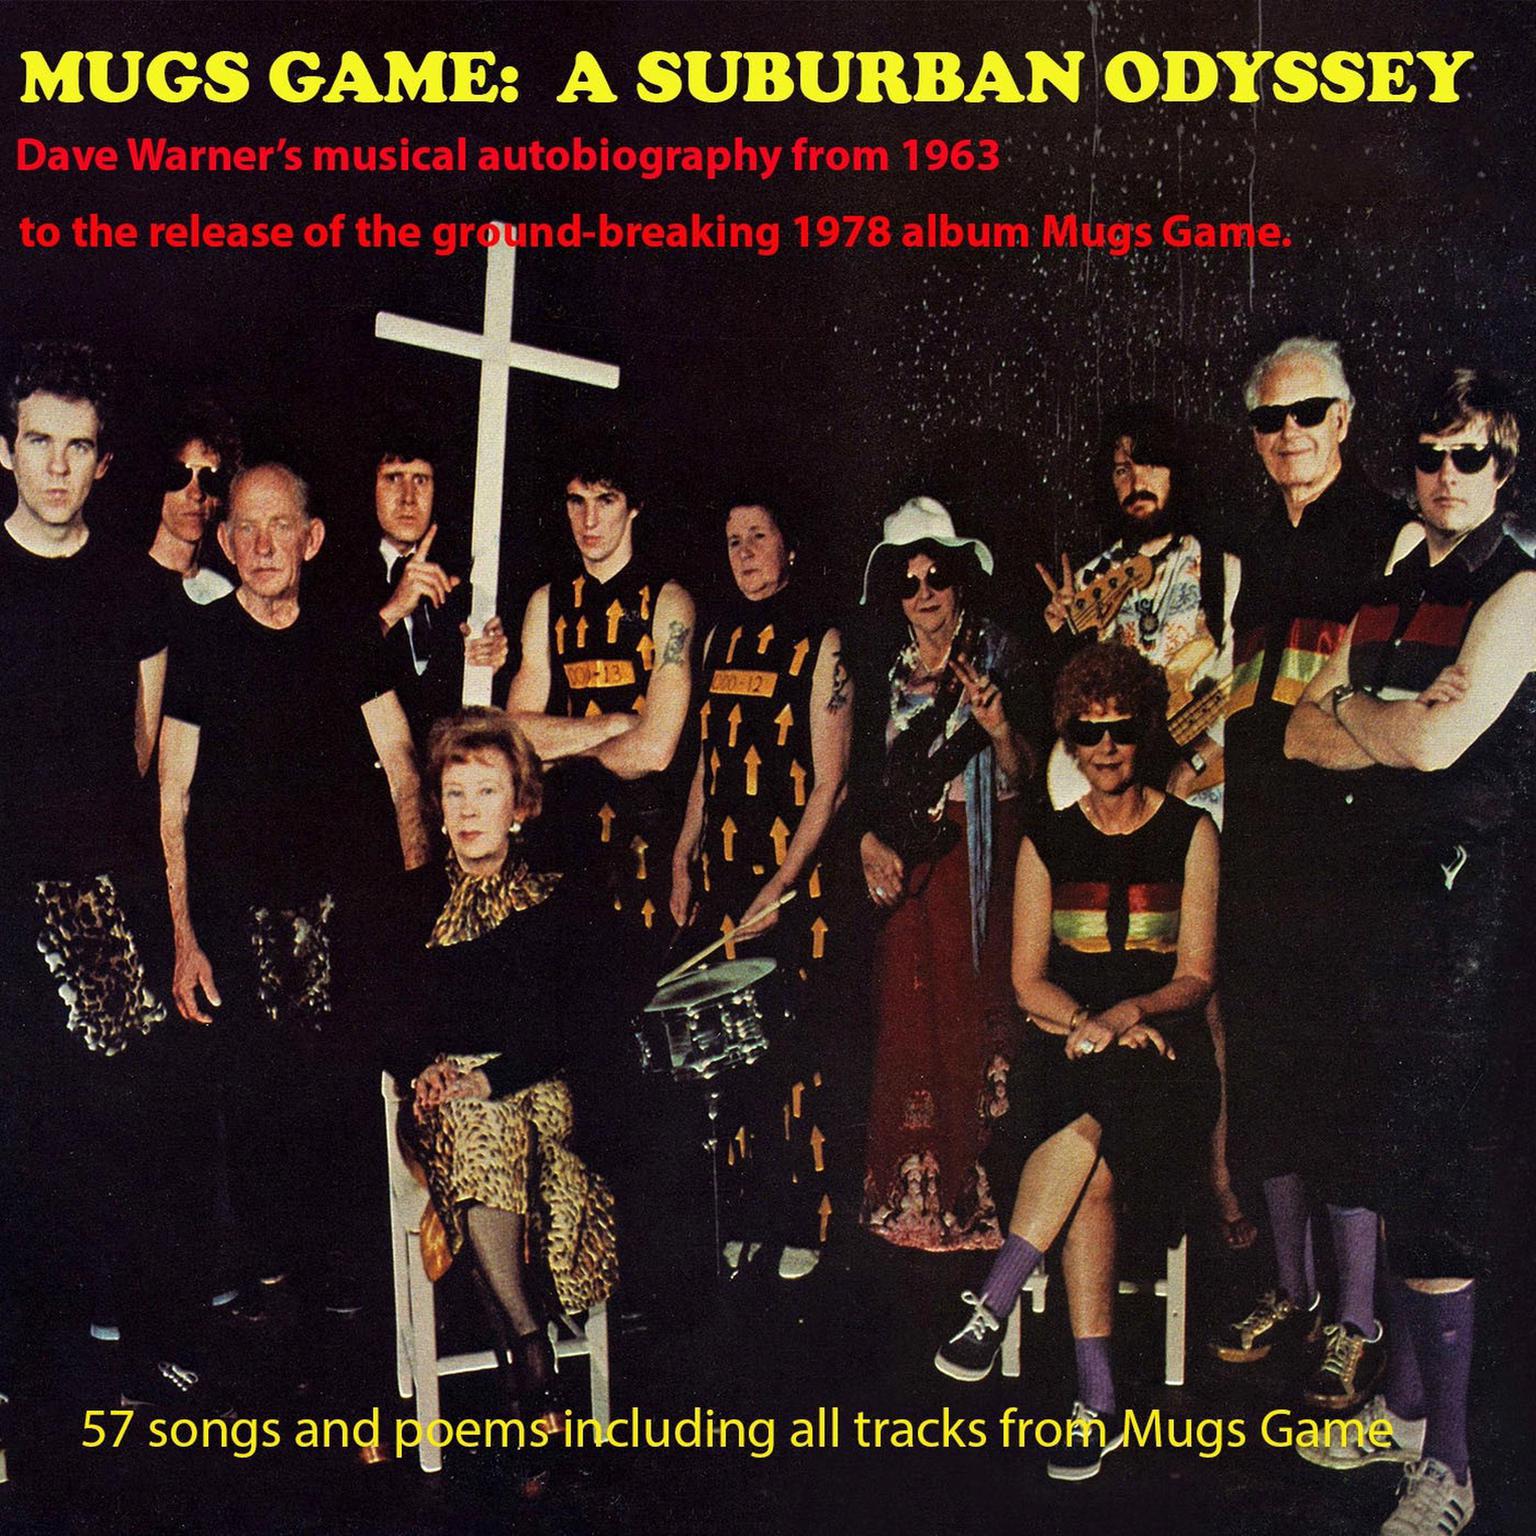 MUGS GAME: A SUBURBAN ODYSSEY: Dave Warners musical autobiography from 1963 to the release of the ground-breaking 1978 album Mugs Game. Audiobook, by Dave Warner